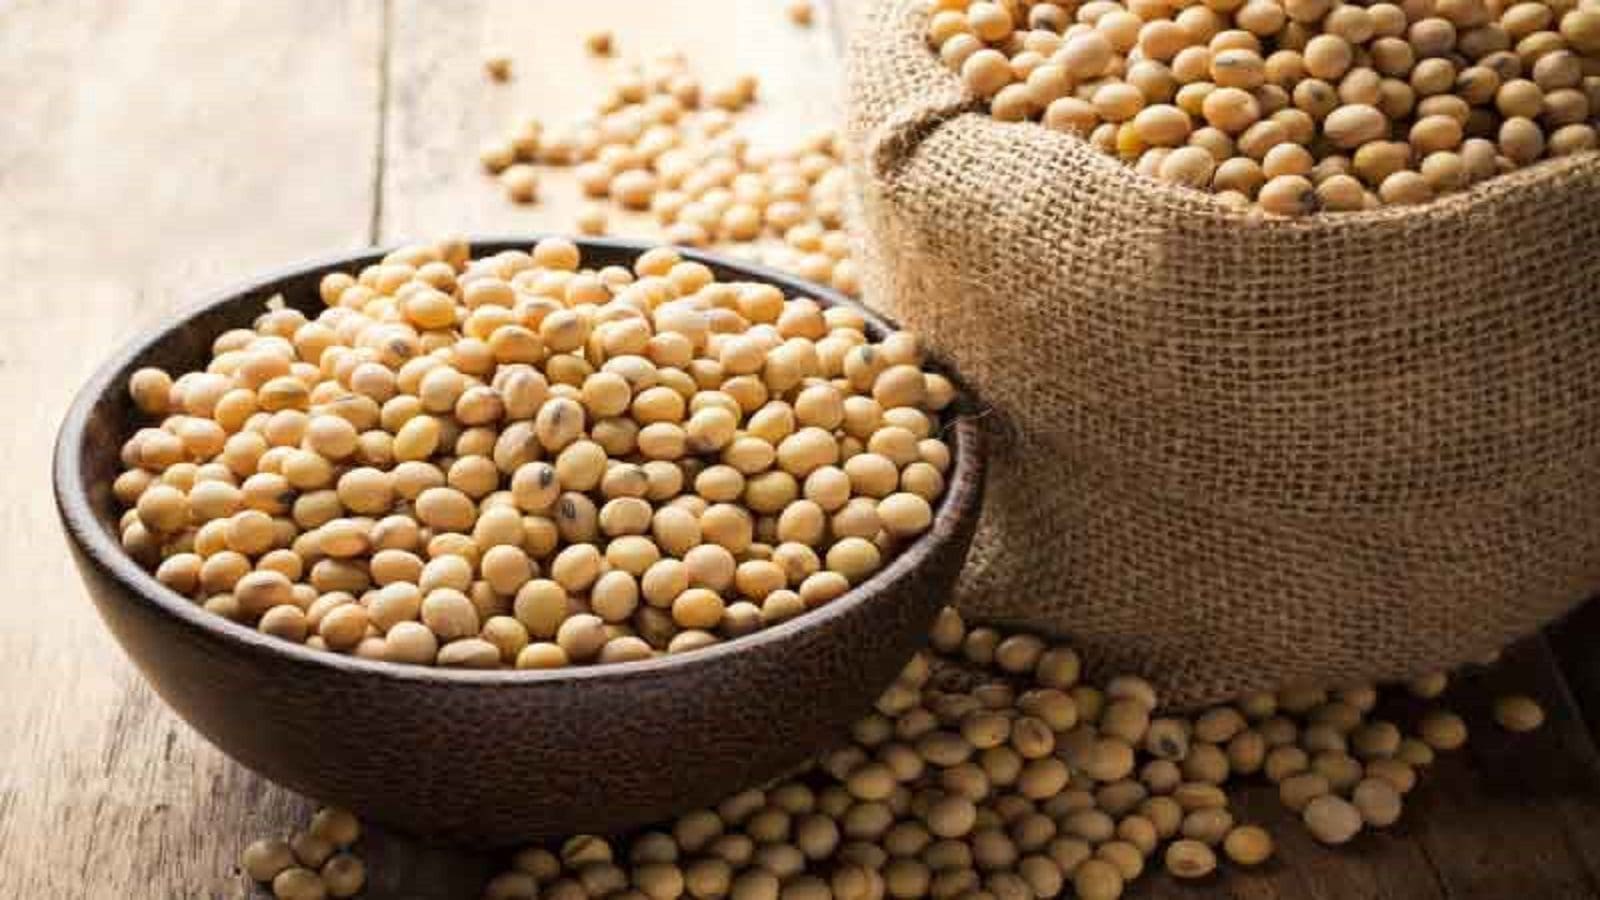 Counter-sanctions endanger soybean industry profitability and export opportunities